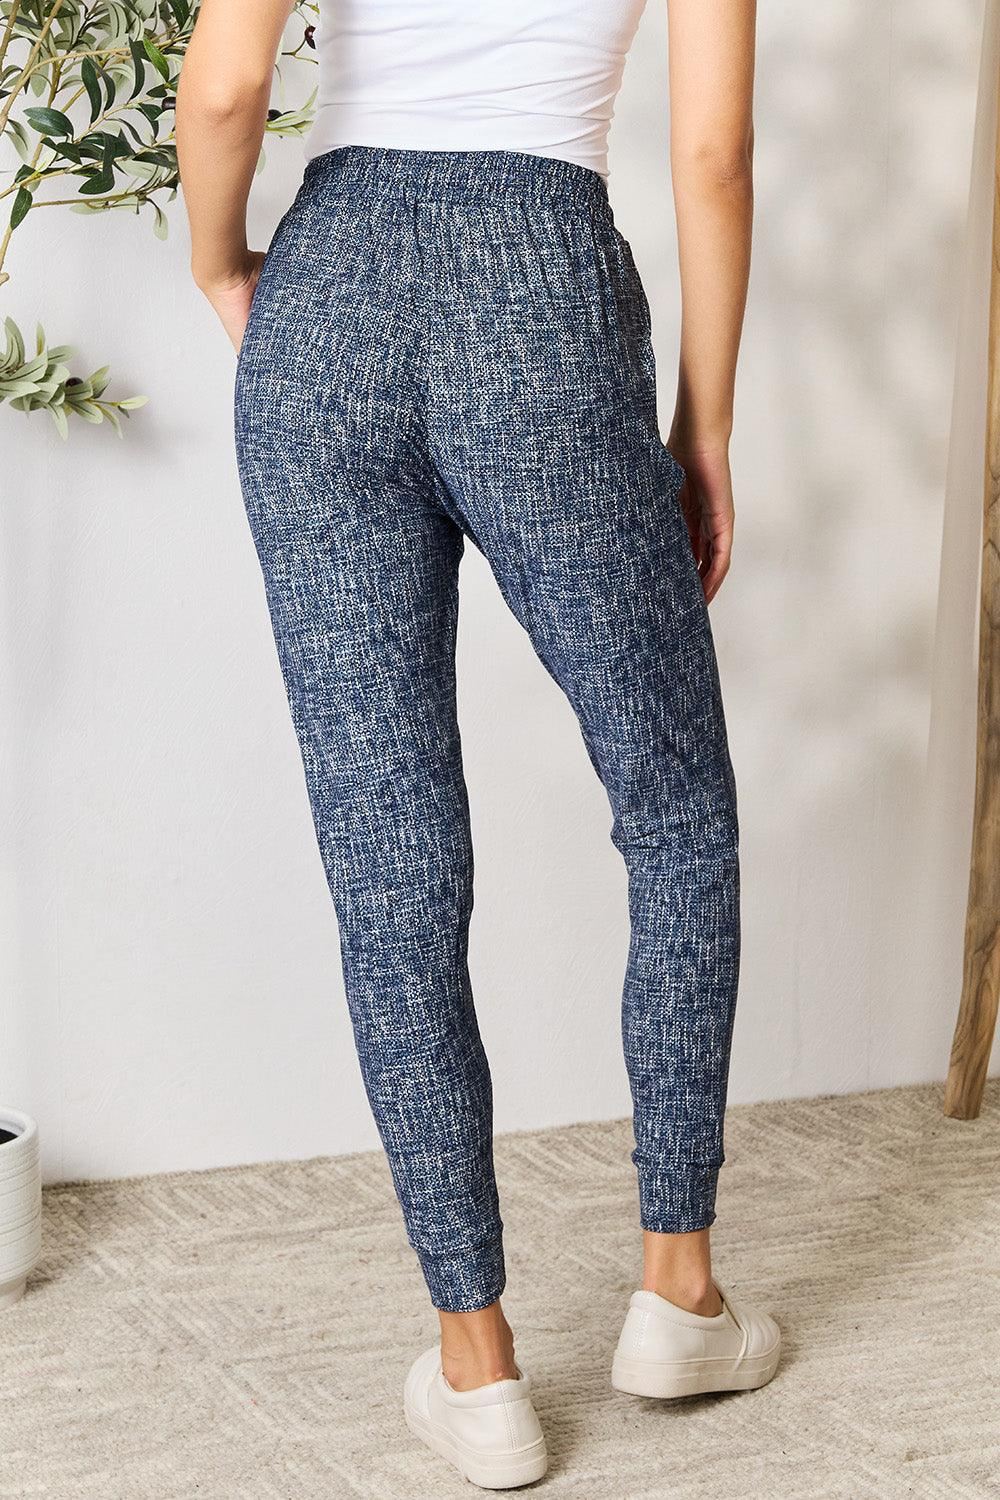 Women's Navy Blue Joggers - Inspired Eye Boutique